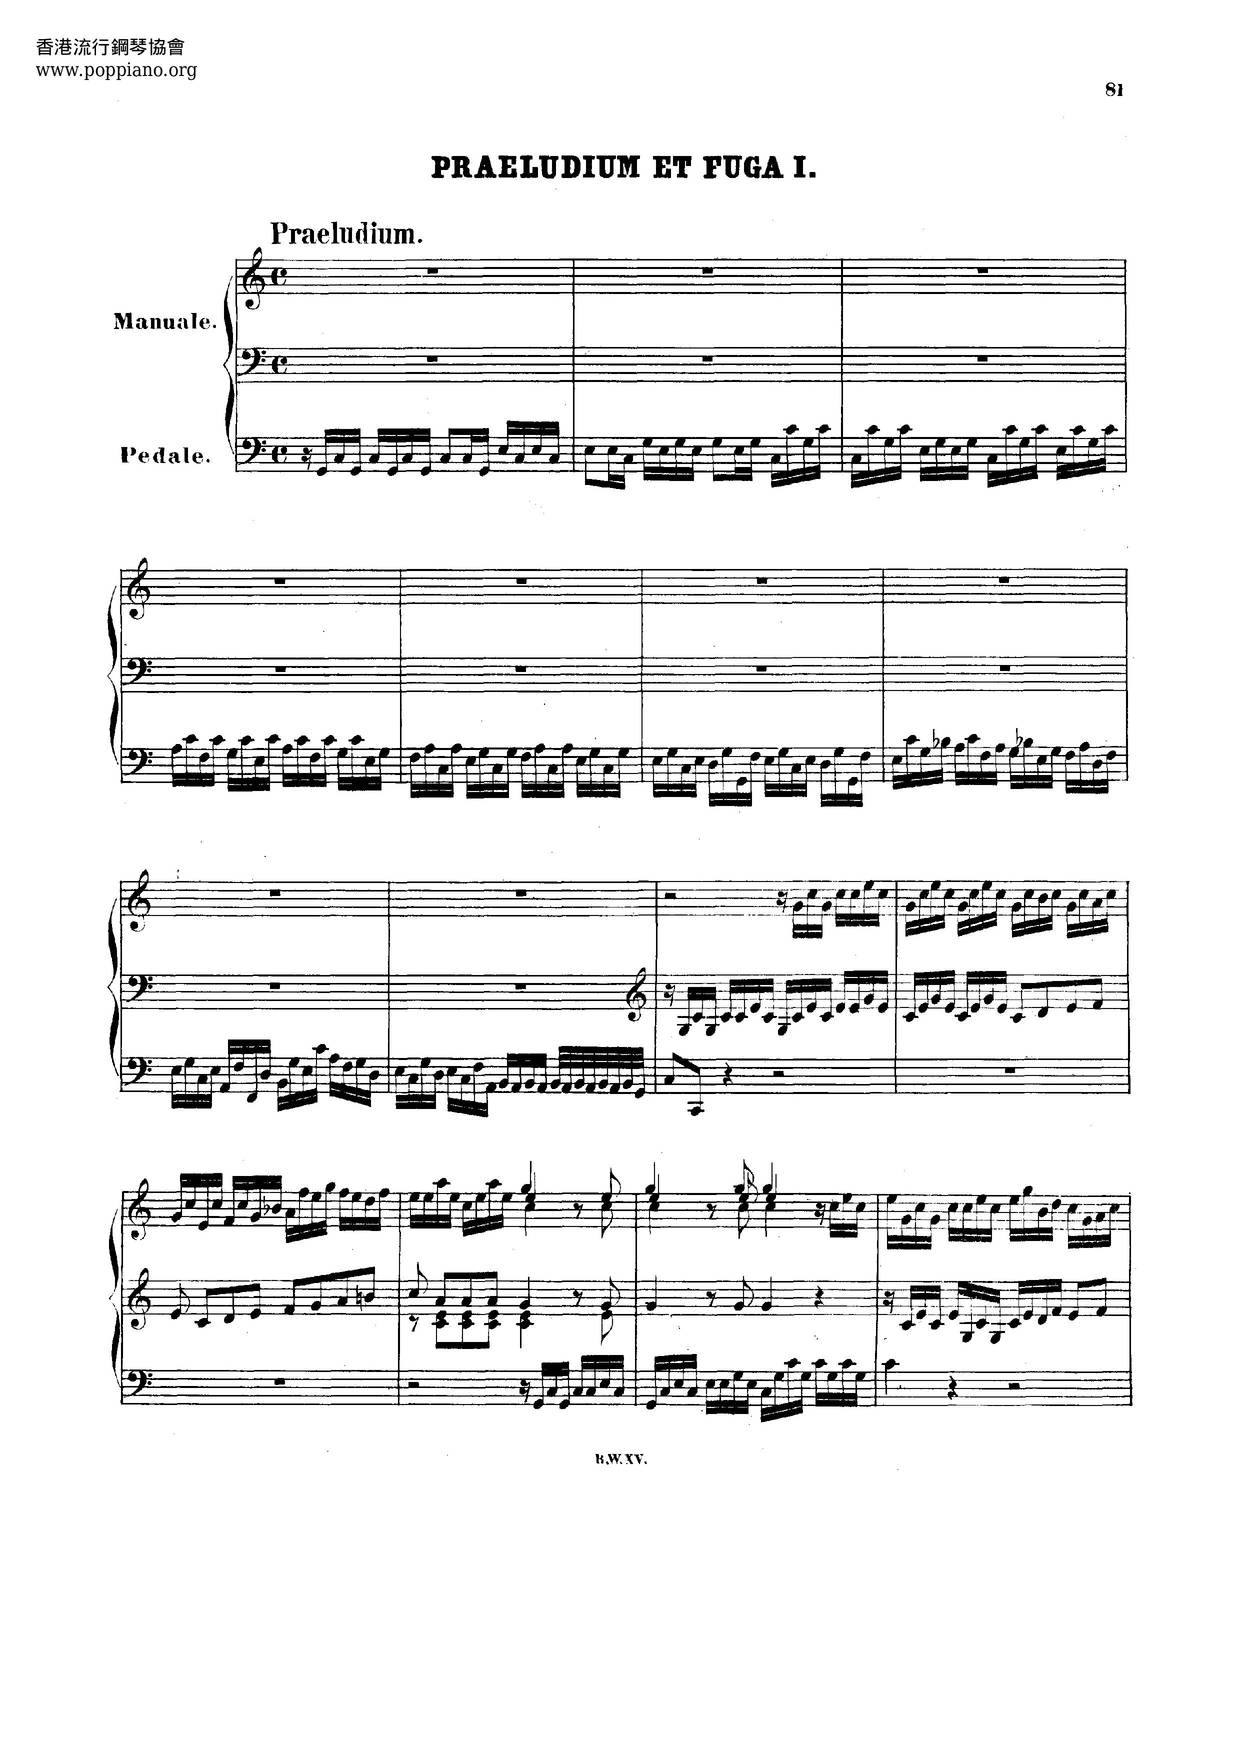 Prelude And Fugue In C Major, BWV 531 Score